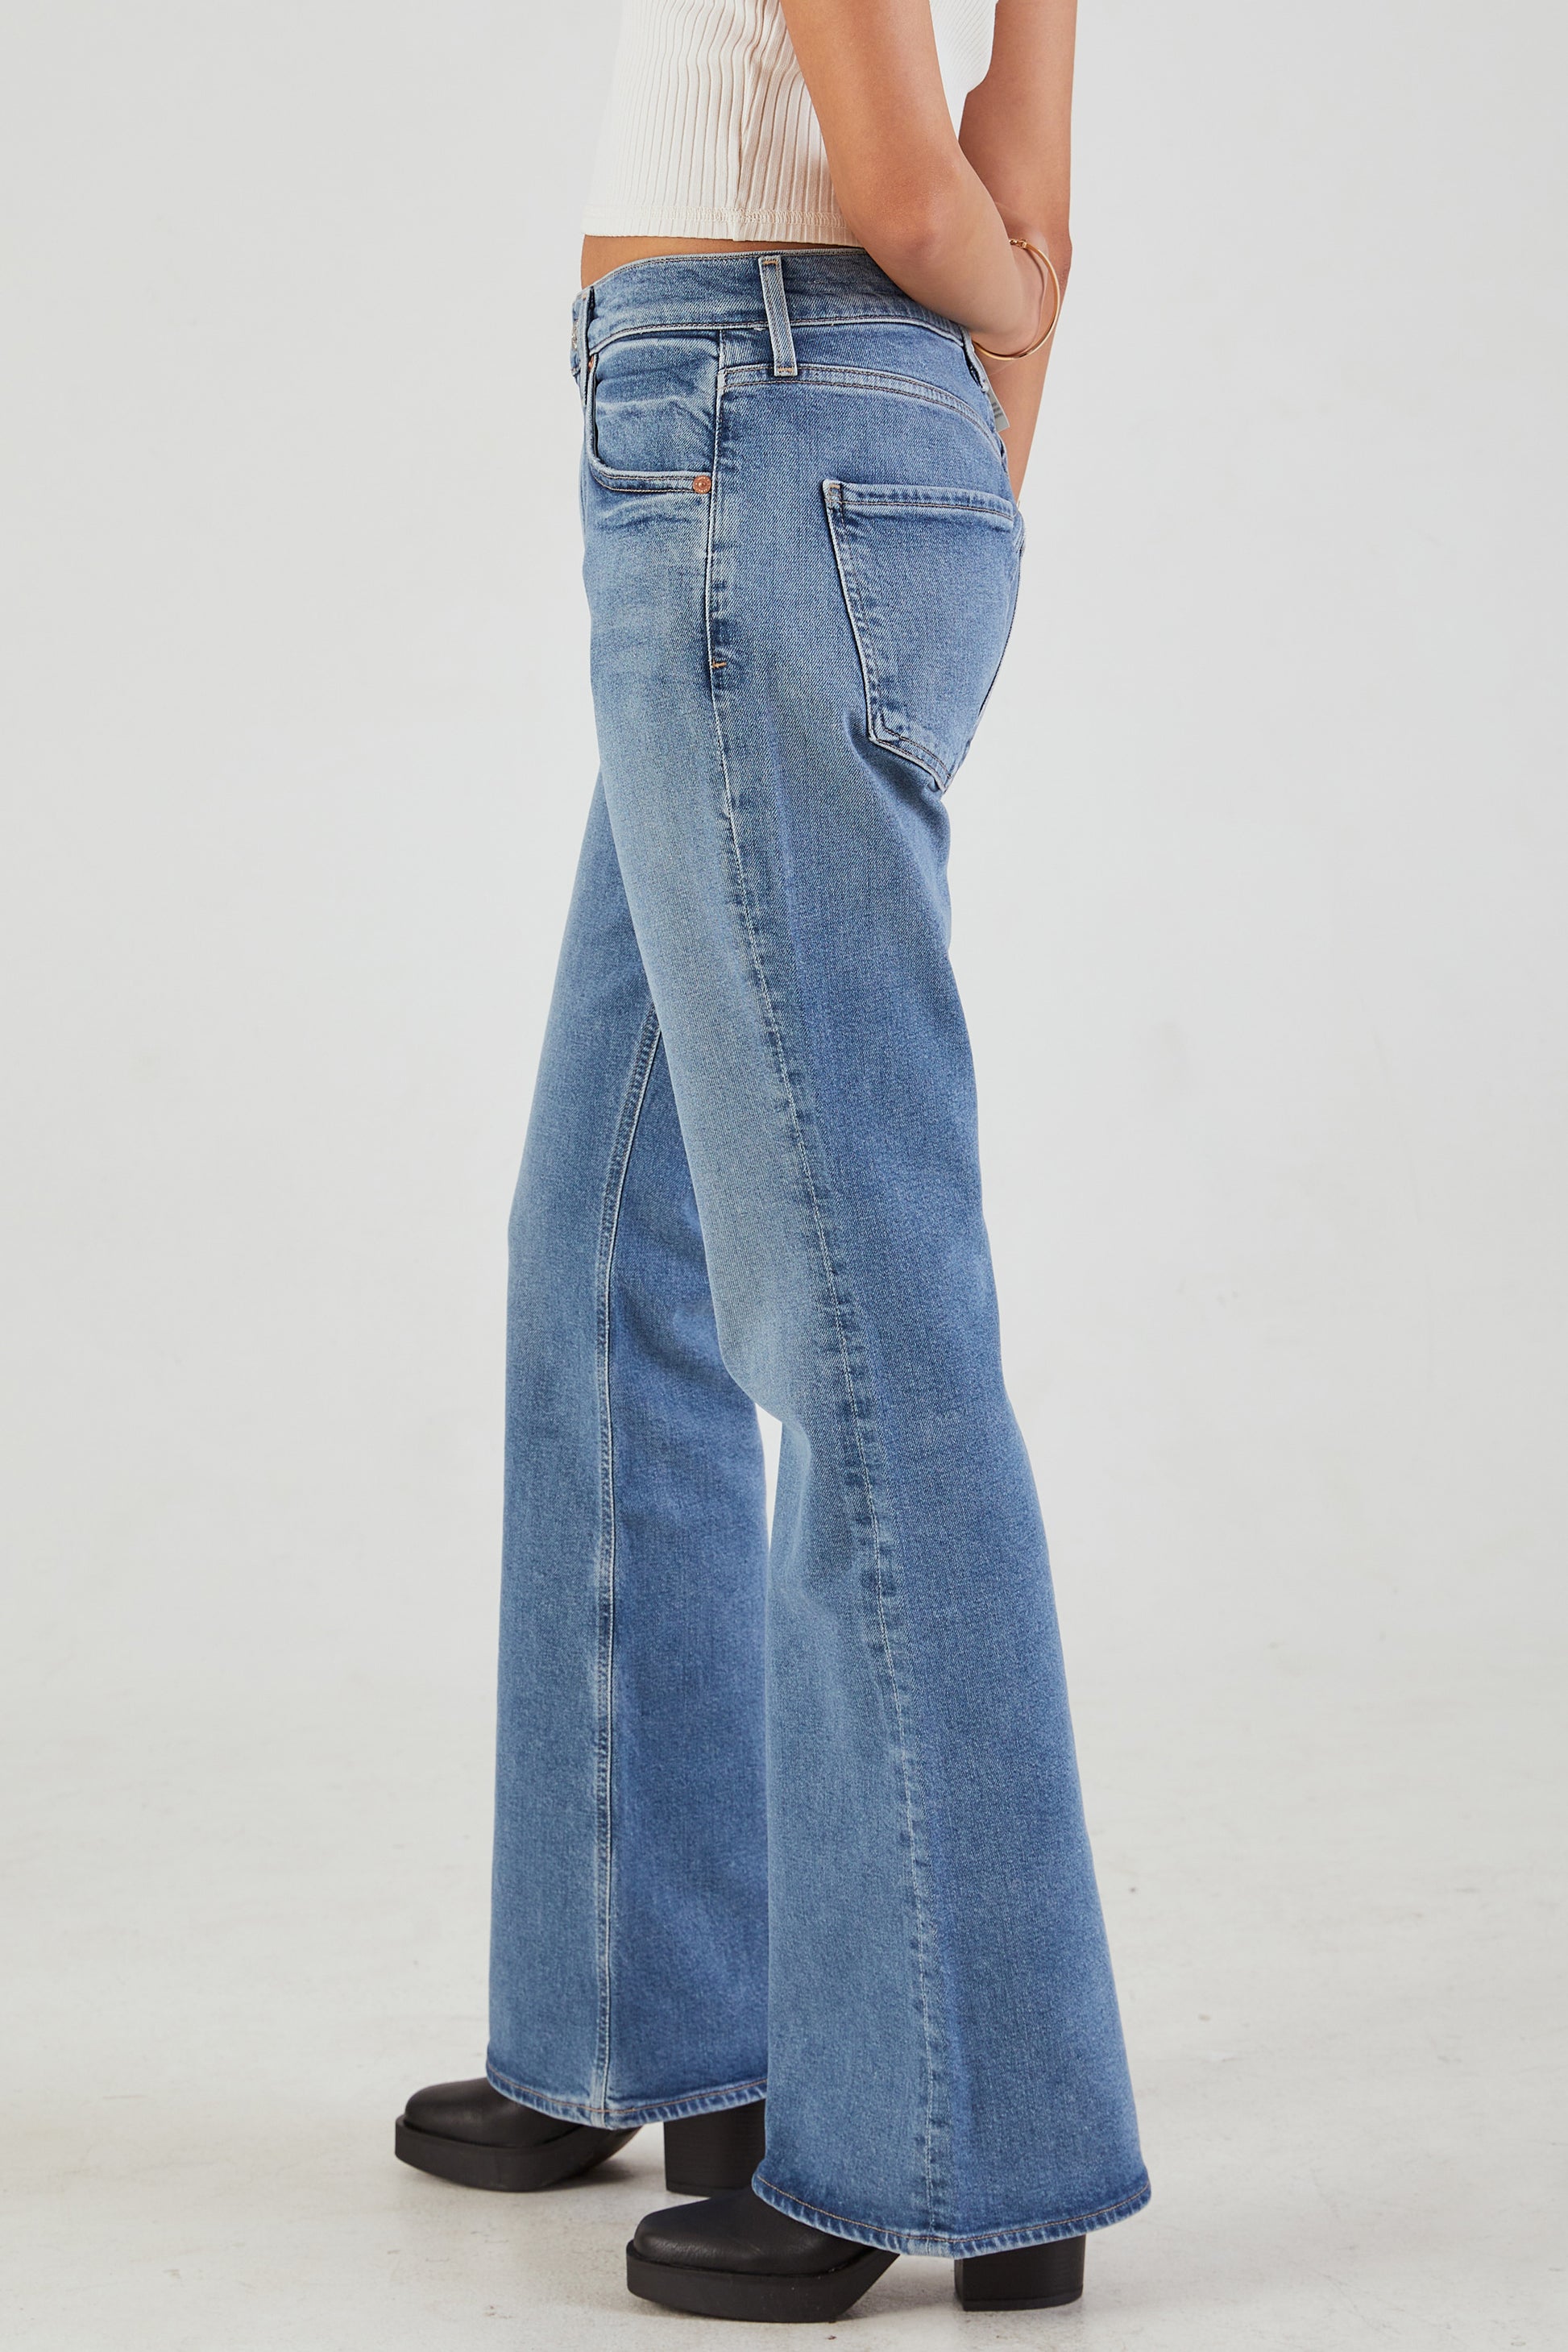 CITIZENS OF HUMANITY Isola Flare 32" Jean in Pegasus